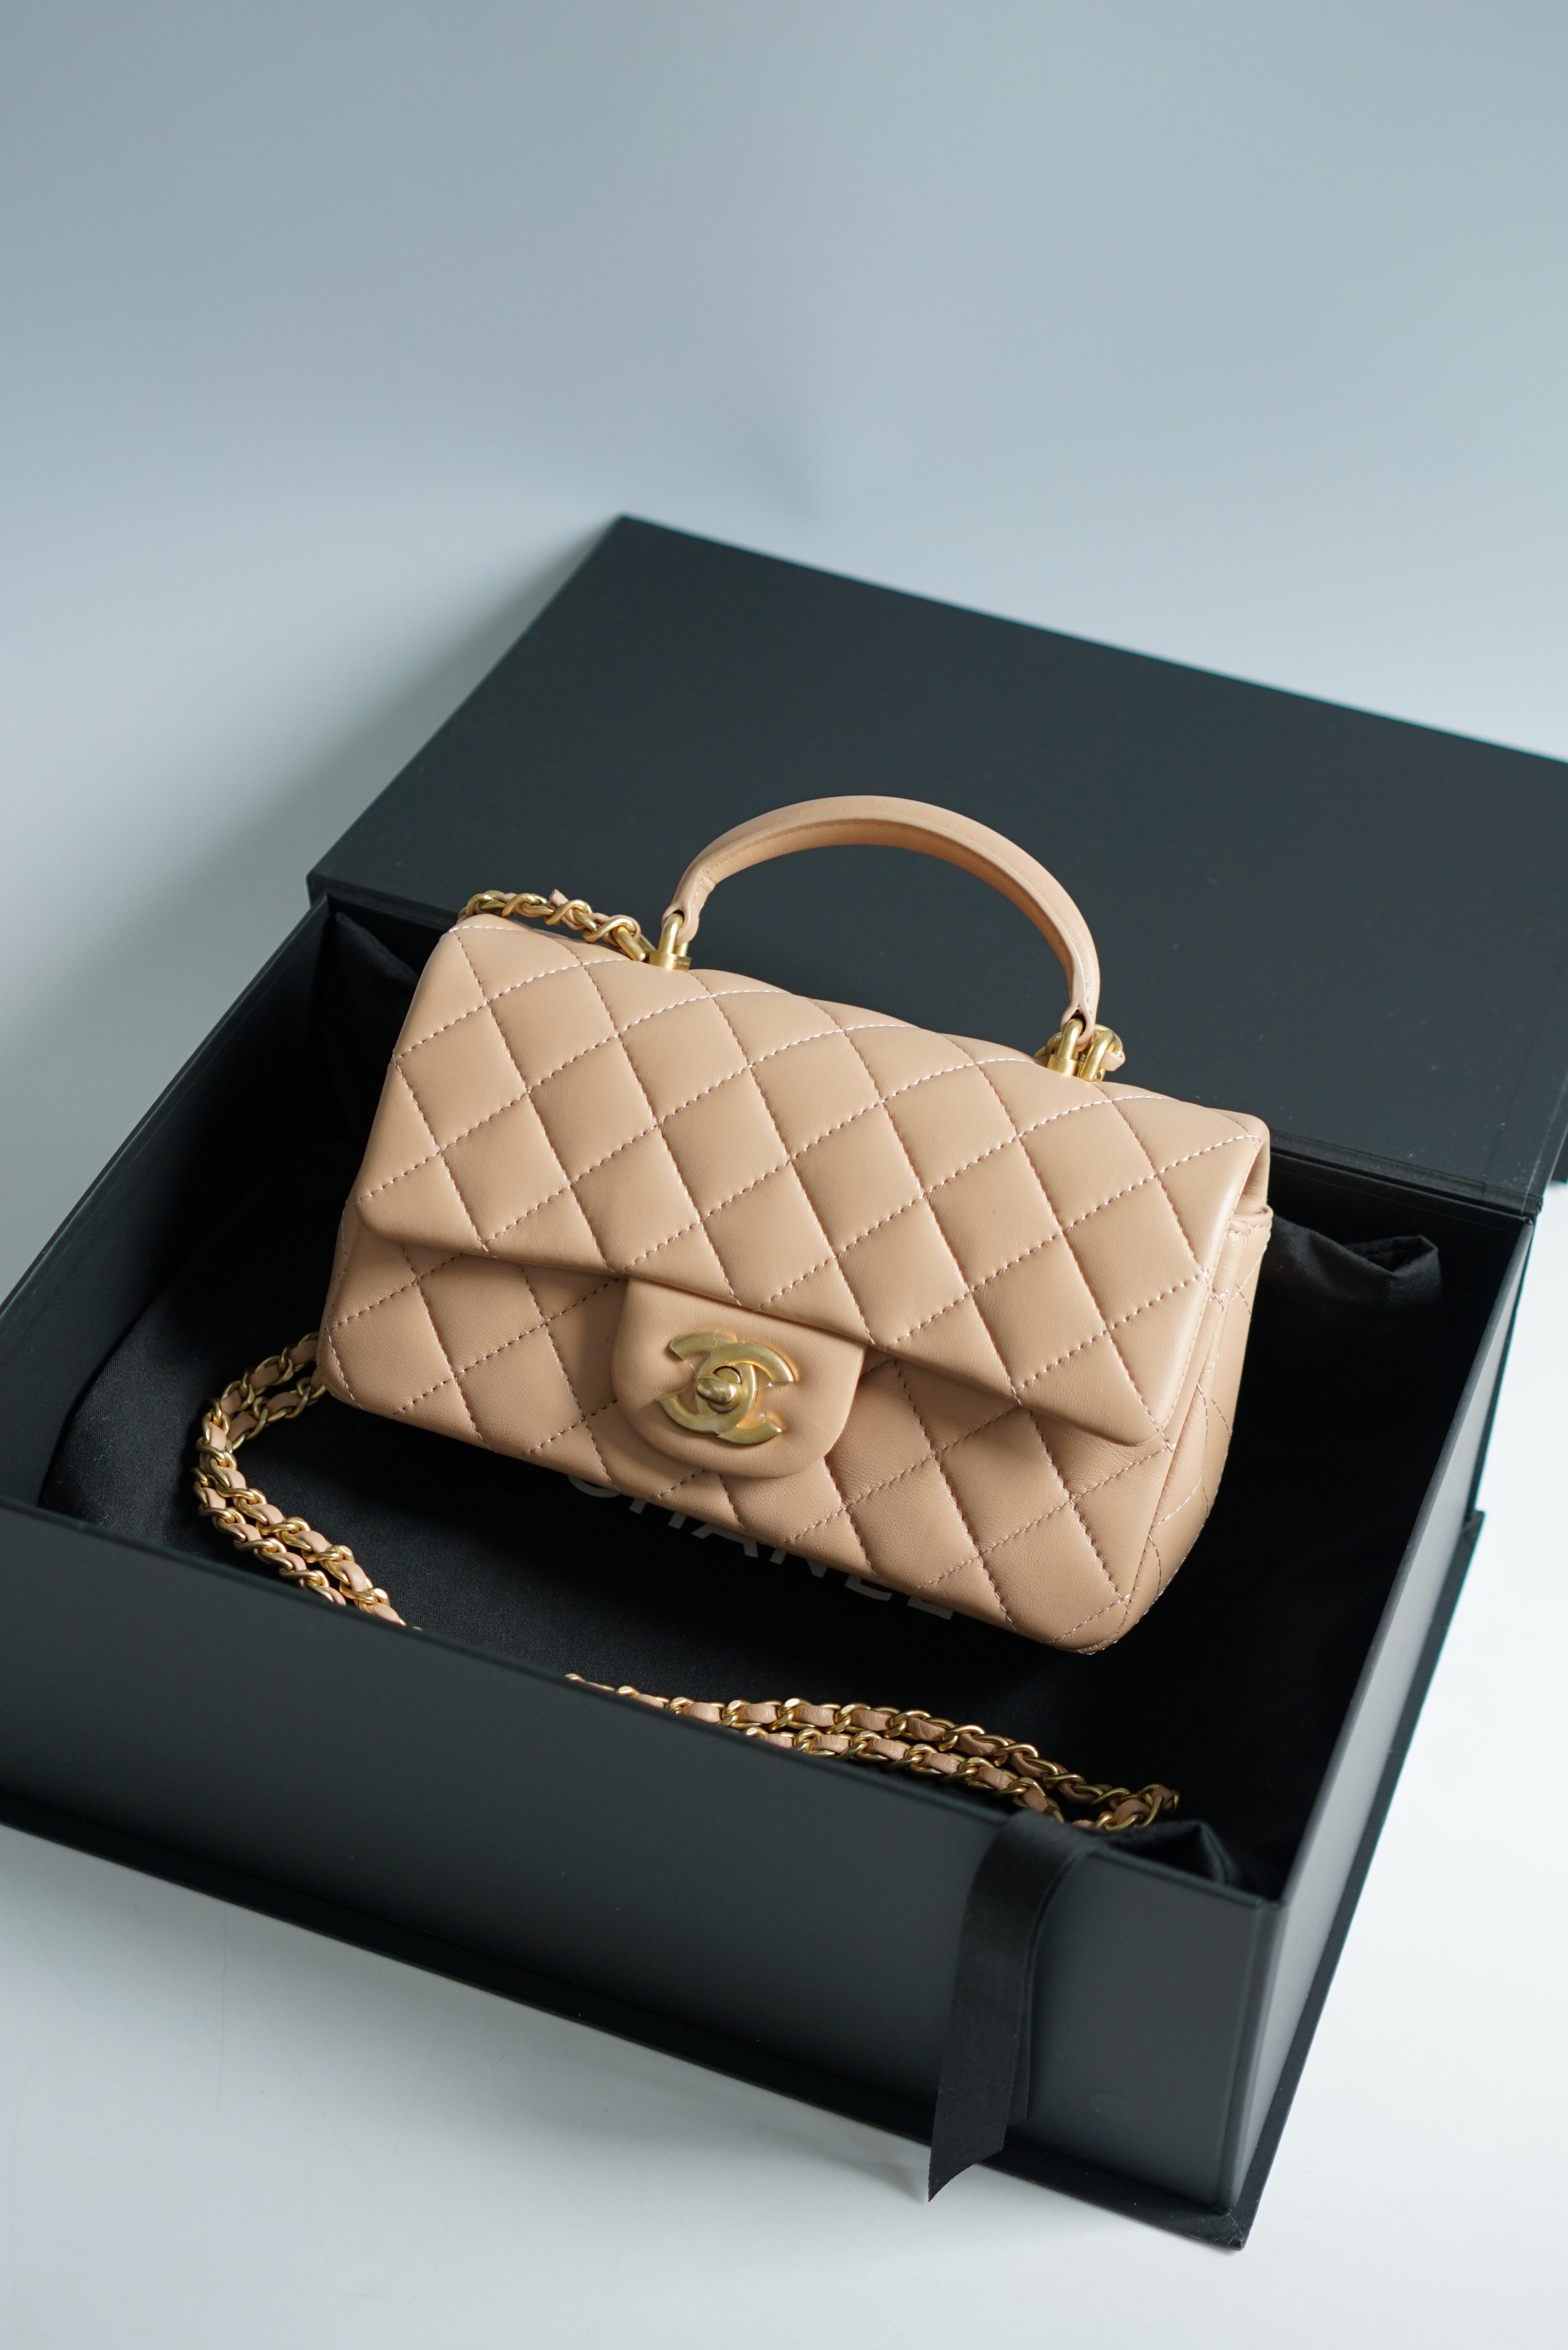 chanel small beige bag